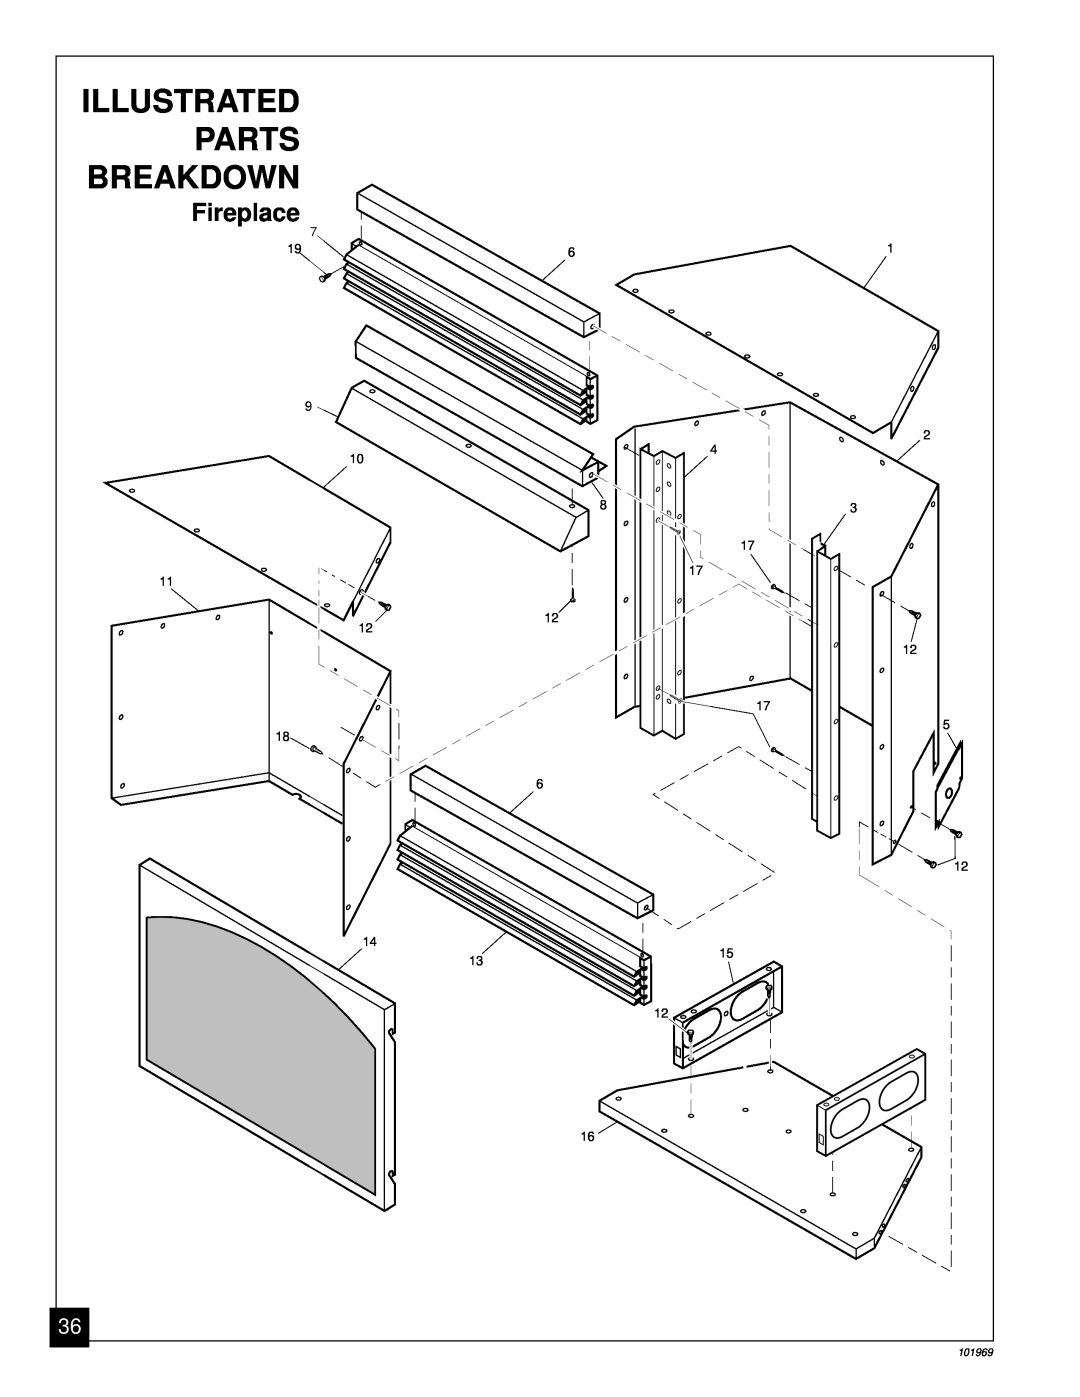 Desa UNVENTED (VENT-FREE) PROPANE GAS FIREPLACE installation manual Fireplace, Illustrated, Parts, Breakdown, 101969 